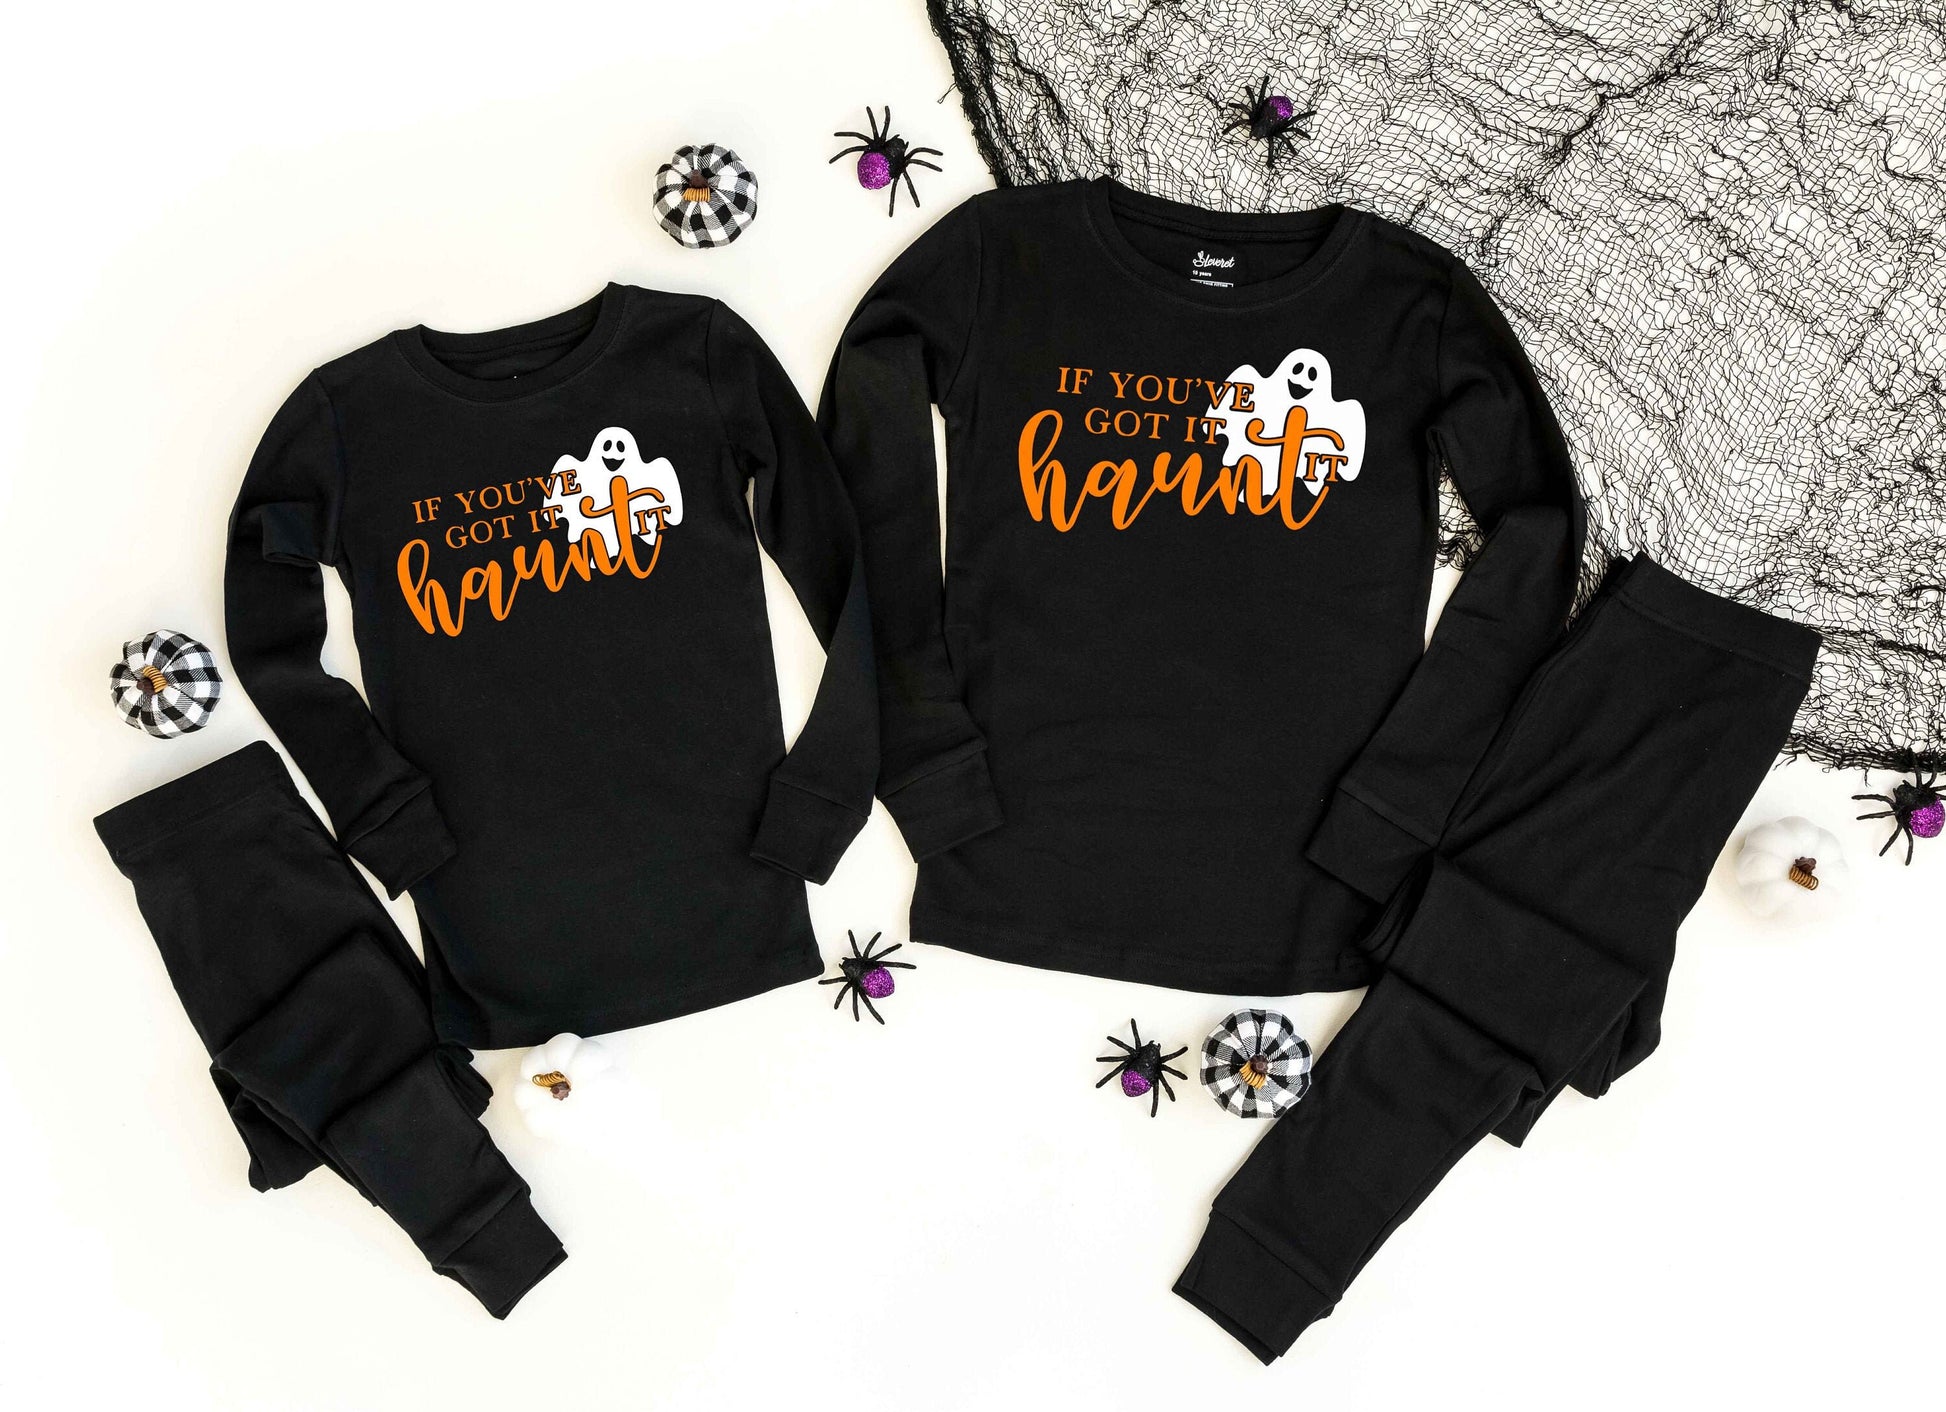 If You've Got it Haunt it Solid Black Pajamas - Halloween Pajama Sets - Kids and Adult Sizes